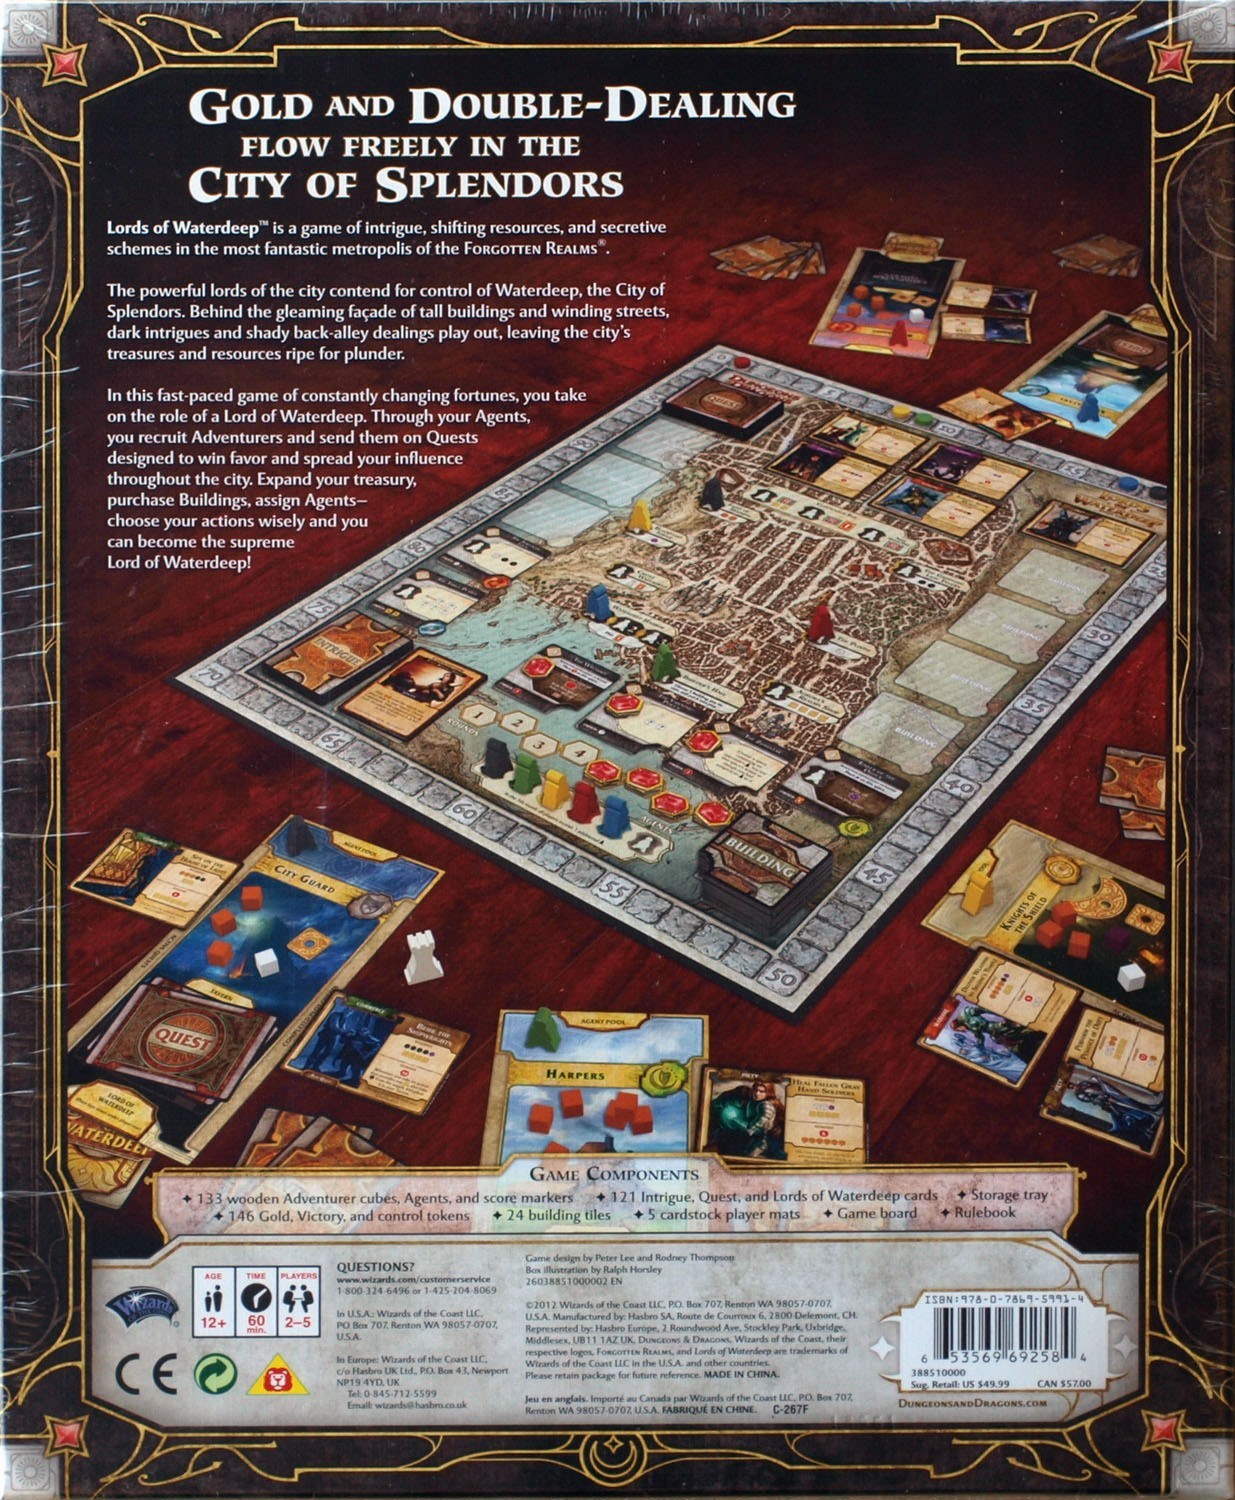 Lords of Waterdeep (Dungeons & Dragons)